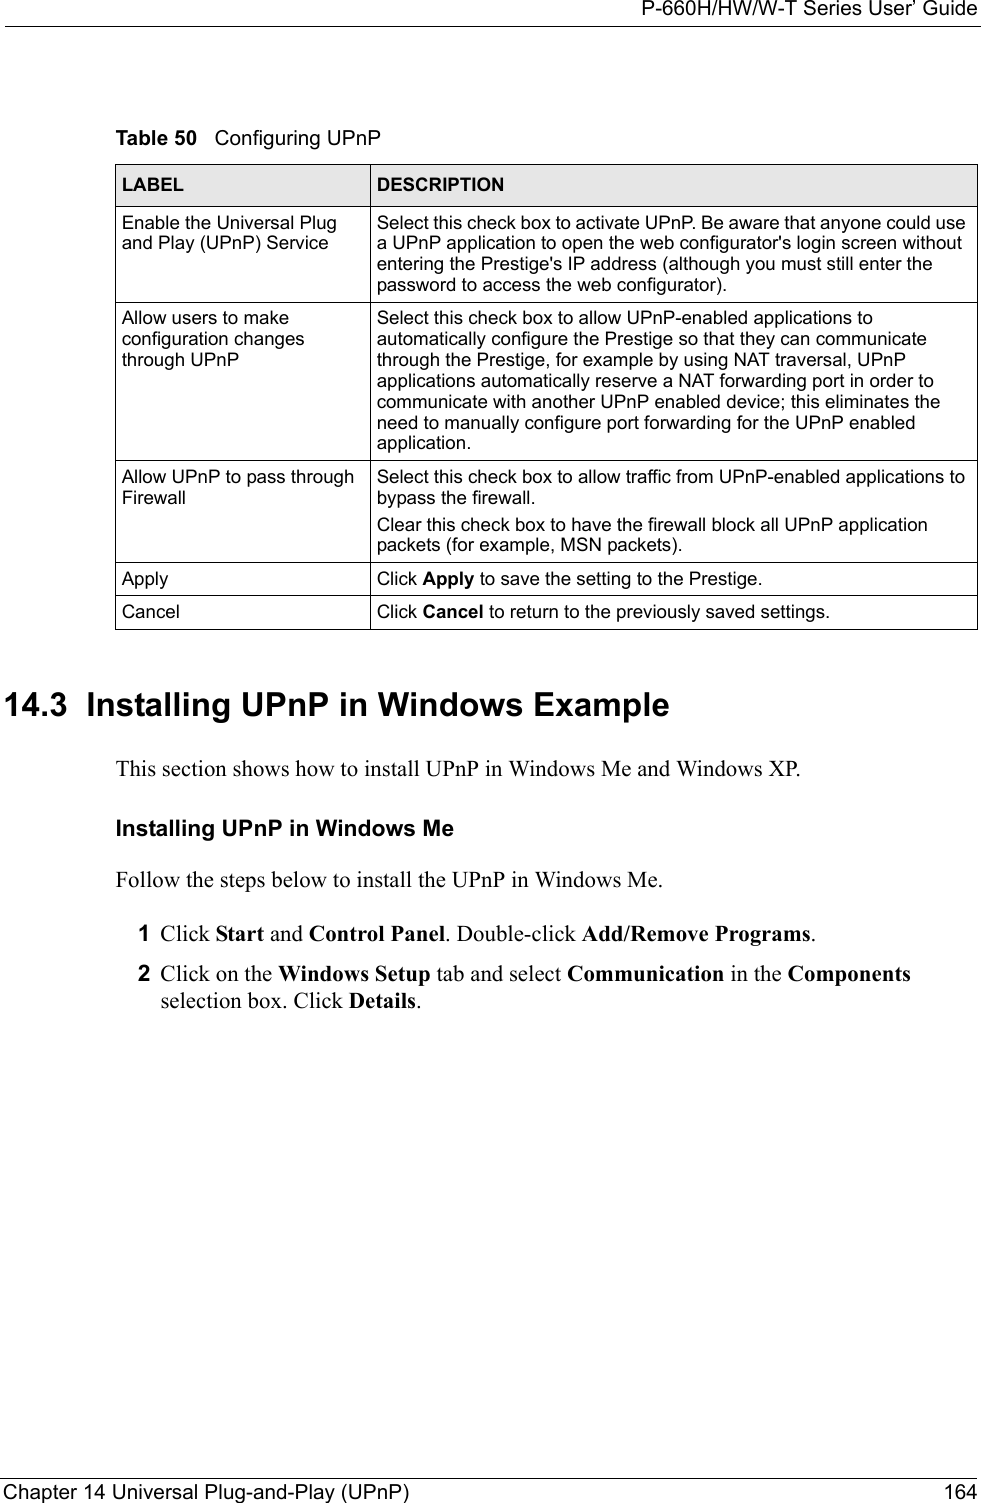 P-660H/HW/W-T Series User’ GuideChapter 14 Universal Plug-and-Play (UPnP) 16414.3  Installing UPnP in Windows ExampleThis section shows how to install UPnP in Windows Me and Windows XP.  Installing UPnP in Windows MeFollow the steps below to install the UPnP in Windows Me. 1Click Start and Control Panel. Double-click Add/Remove Programs.2Click on the Windows Setup tab and select Communication in the Components selection box. Click Details.  Table 50   Configuring UPnPLABEL DESCRIPTIONEnable the Universal Plug and Play (UPnP) Service Select this check box to activate UPnP. Be aware that anyone could use a UPnP application to open the web configurator&apos;s login screen without entering the Prestige&apos;s IP address (although you must still enter the password to access the web configurator).Allow users to make configuration changes through UPnPSelect this check box to allow UPnP-enabled applications to automatically configure the Prestige so that they can communicate through the Prestige, for example by using NAT traversal, UPnP applications automatically reserve a NAT forwarding port in order to communicate with another UPnP enabled device; this eliminates the need to manually configure port forwarding for the UPnP enabled application. Allow UPnP to pass through FirewallSelect this check box to allow traffic from UPnP-enabled applications to bypass the firewall. Clear this check box to have the firewall block all UPnP application packets (for example, MSN packets).Apply Click Apply to save the setting to the Prestige.Cancel Click Cancel to return to the previously saved settings.